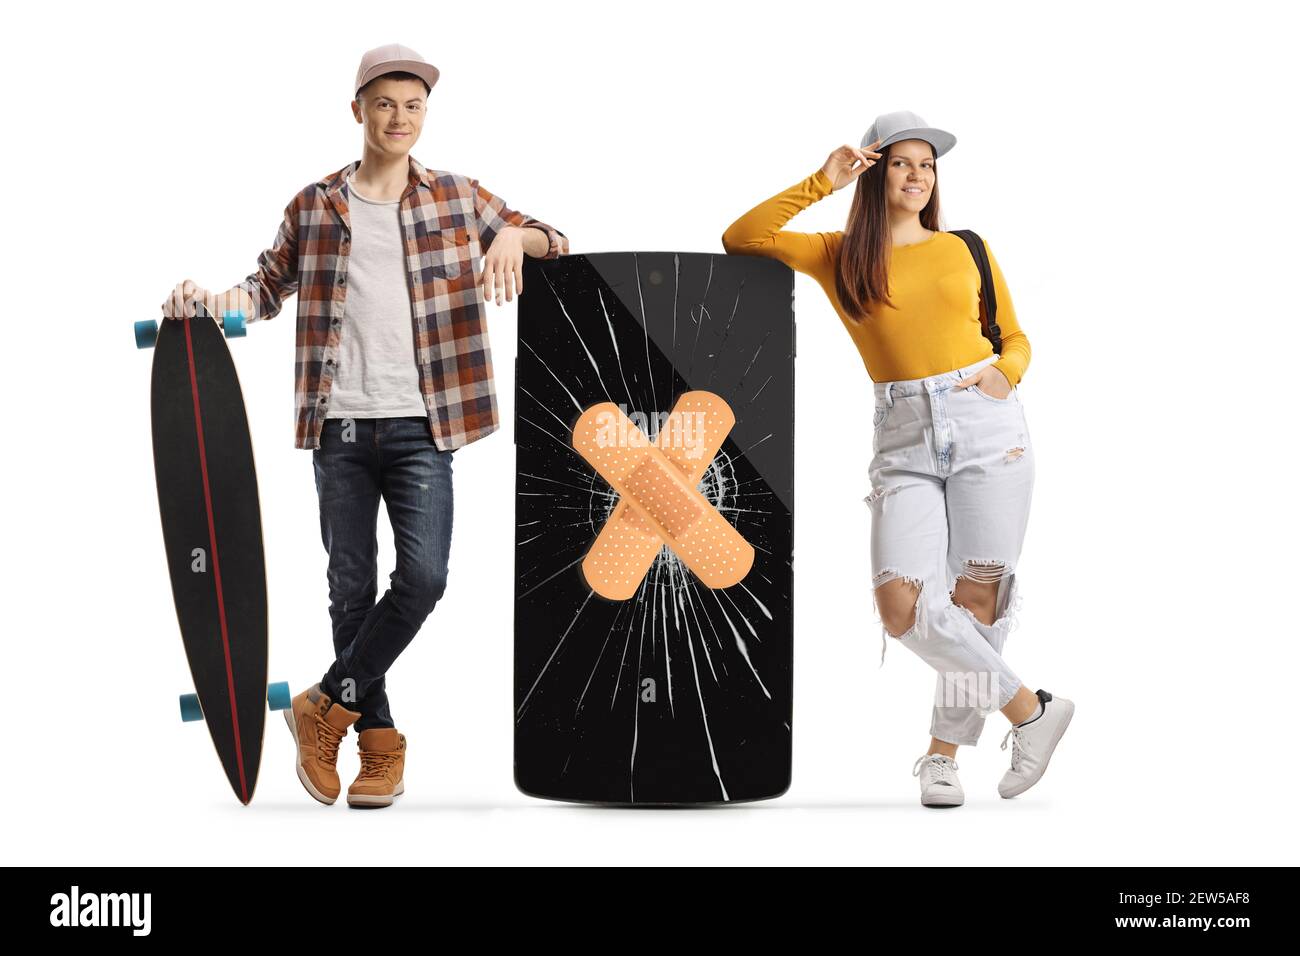 Full length portrait of a guy with a skateboard and female student leaning on a mobile phone with cracked screen and bandage isolated on white backgro Stock Photo